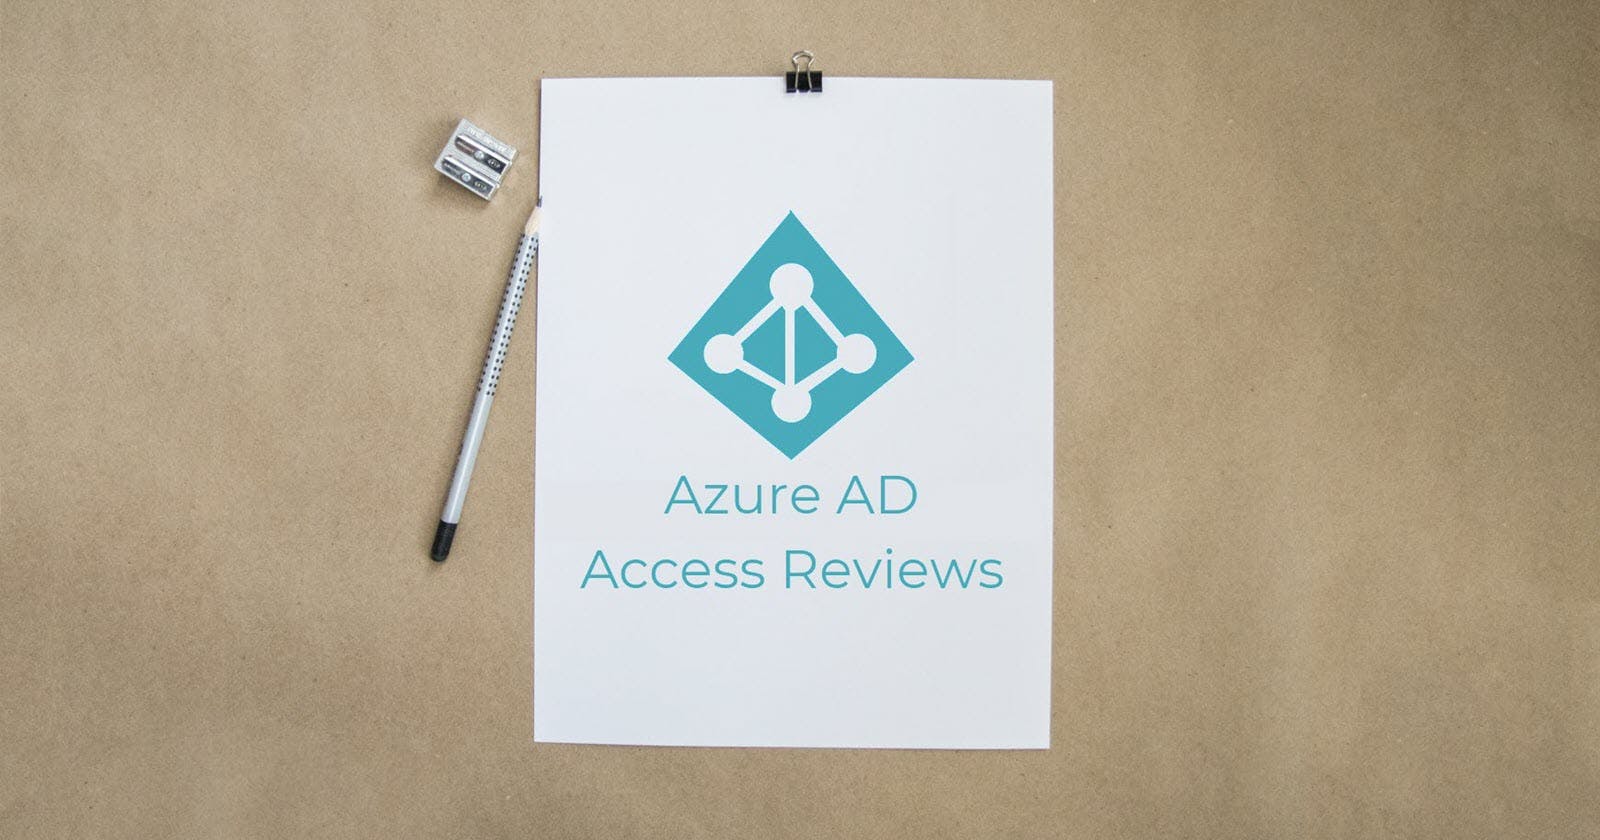 Azure AD Access Reviews - A brief overview